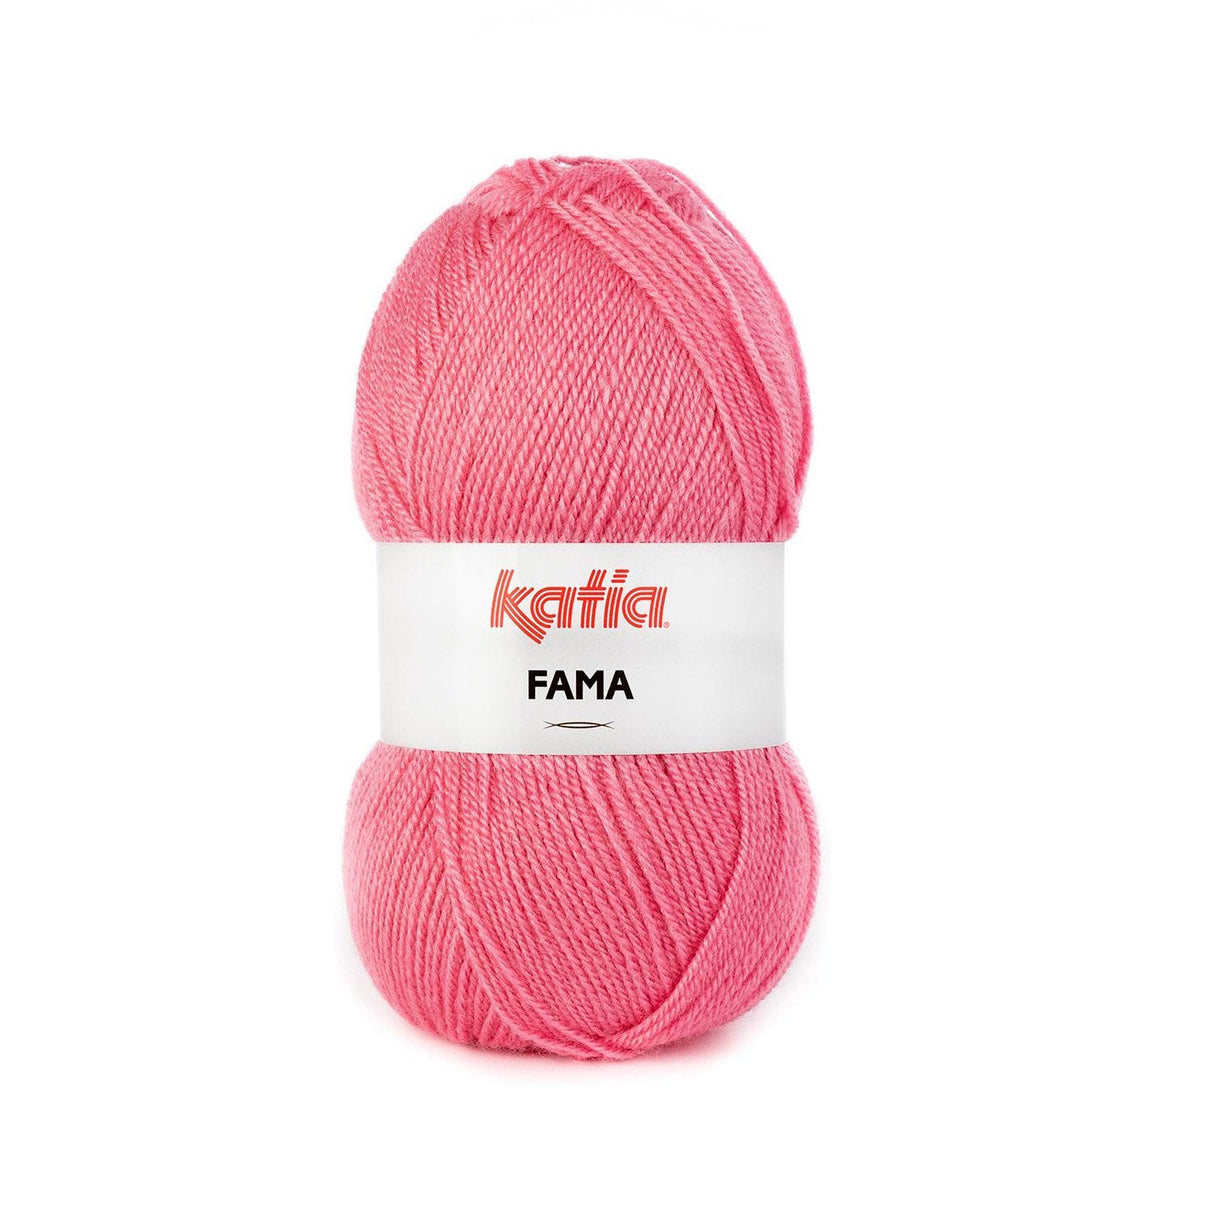 Katia FAMA: A Versatile Option in a Wide Variety of Colors